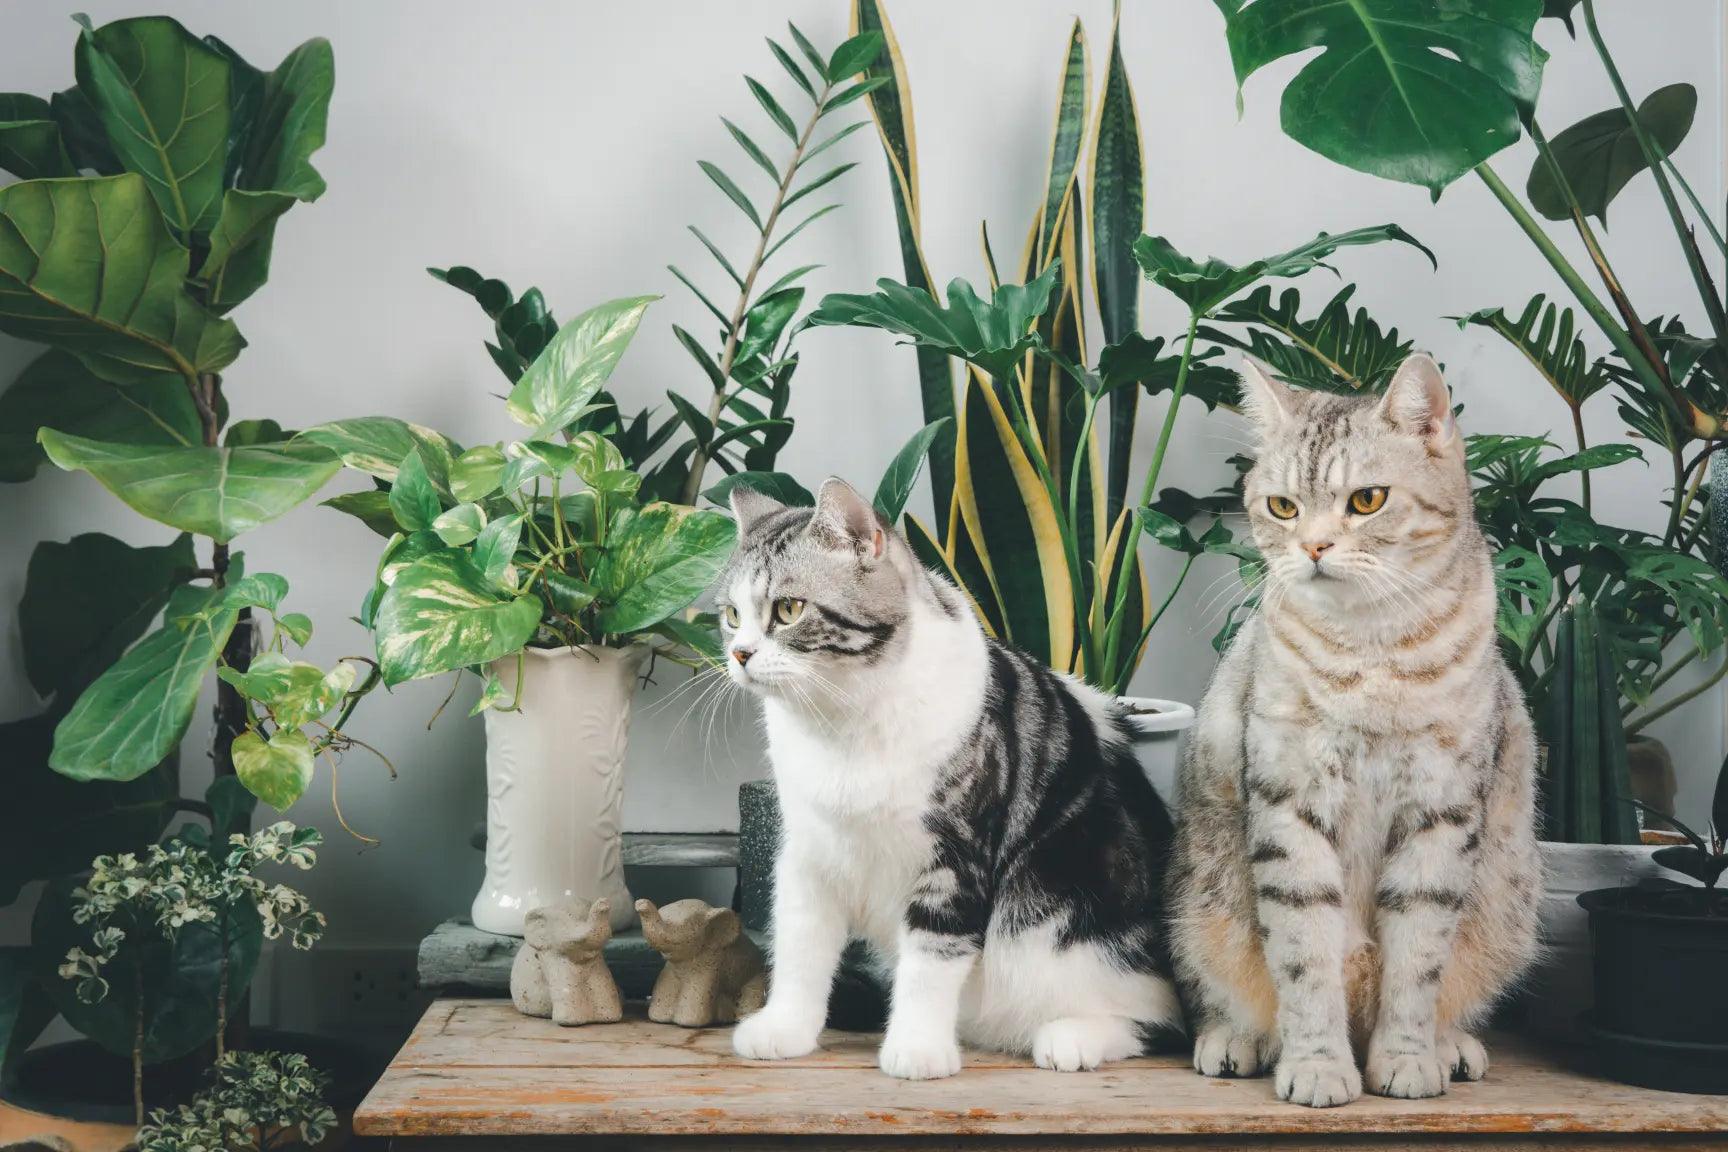 What Indoor Plants Are Safe for Cats? - KittyNook Cat Company